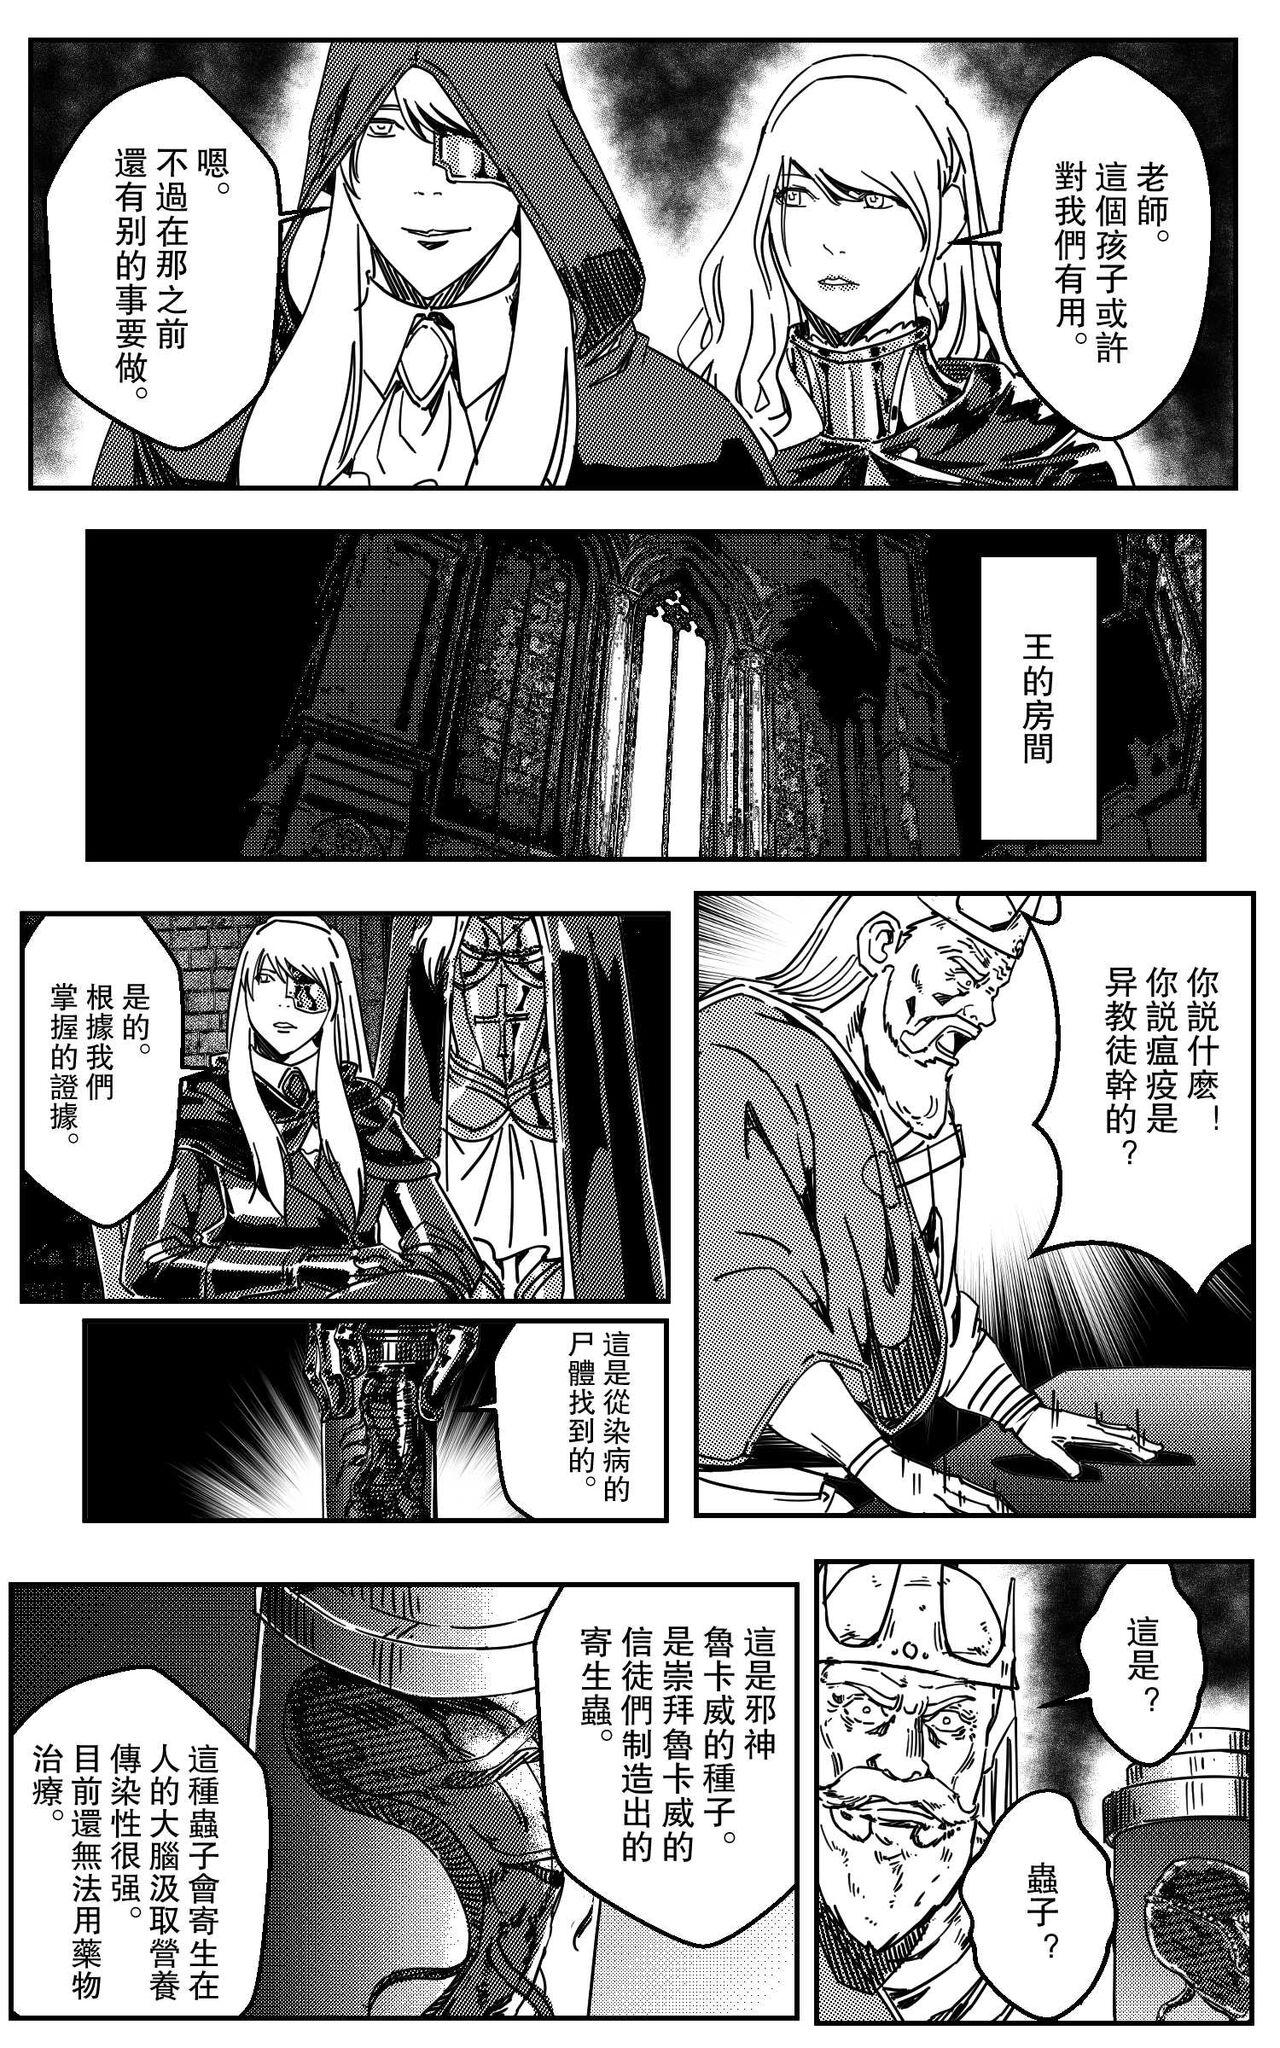 Hot Whores 鉄處女/Ironmaiden 01-03（已腰斬） - Original Unshaved - Page 8